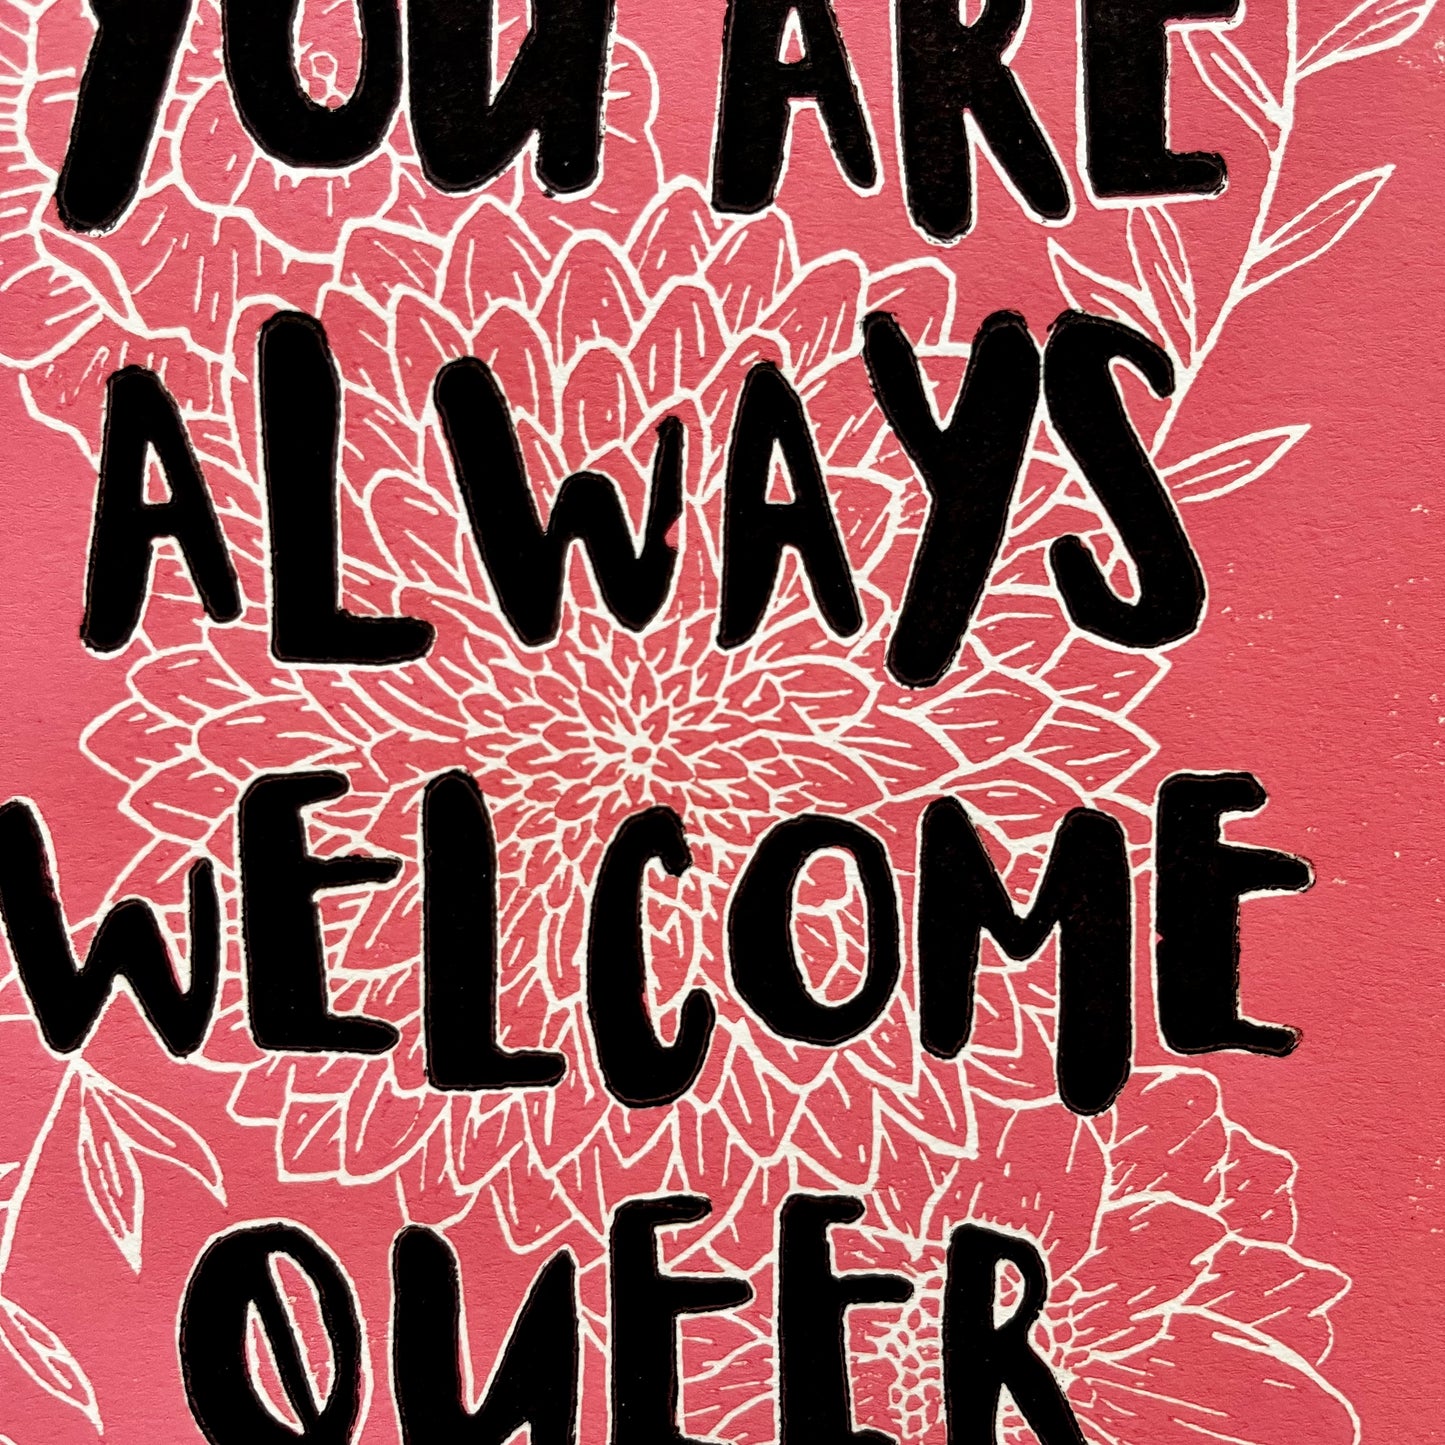 “You Are Always Welcome Queer” LINOCUT PRINT | Limited Edition